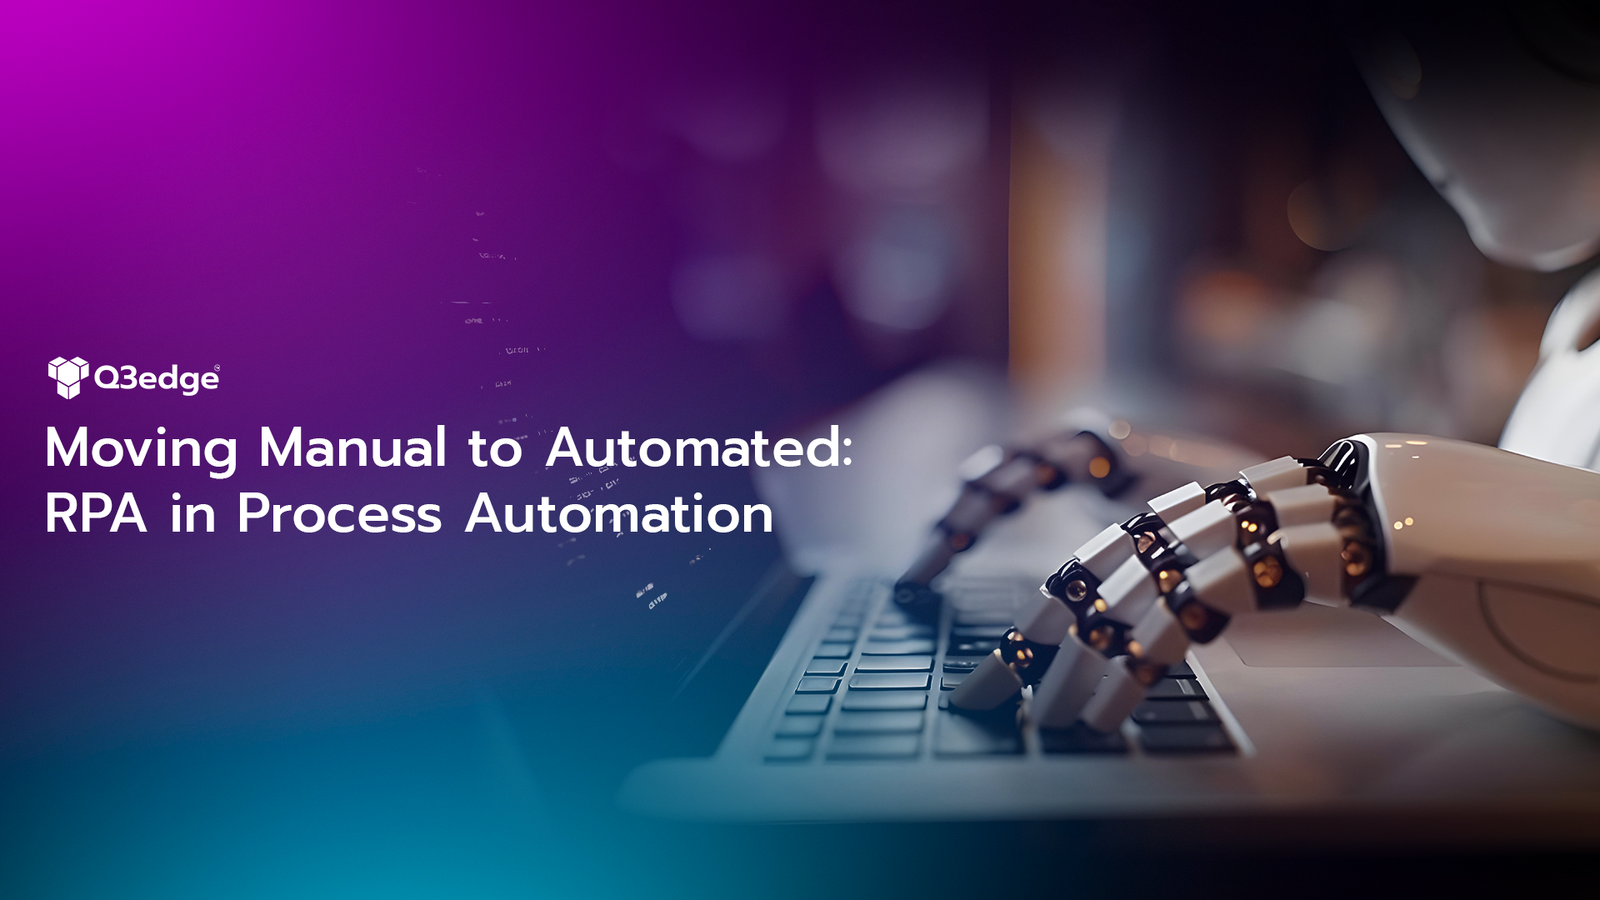 RPA in Process Automation